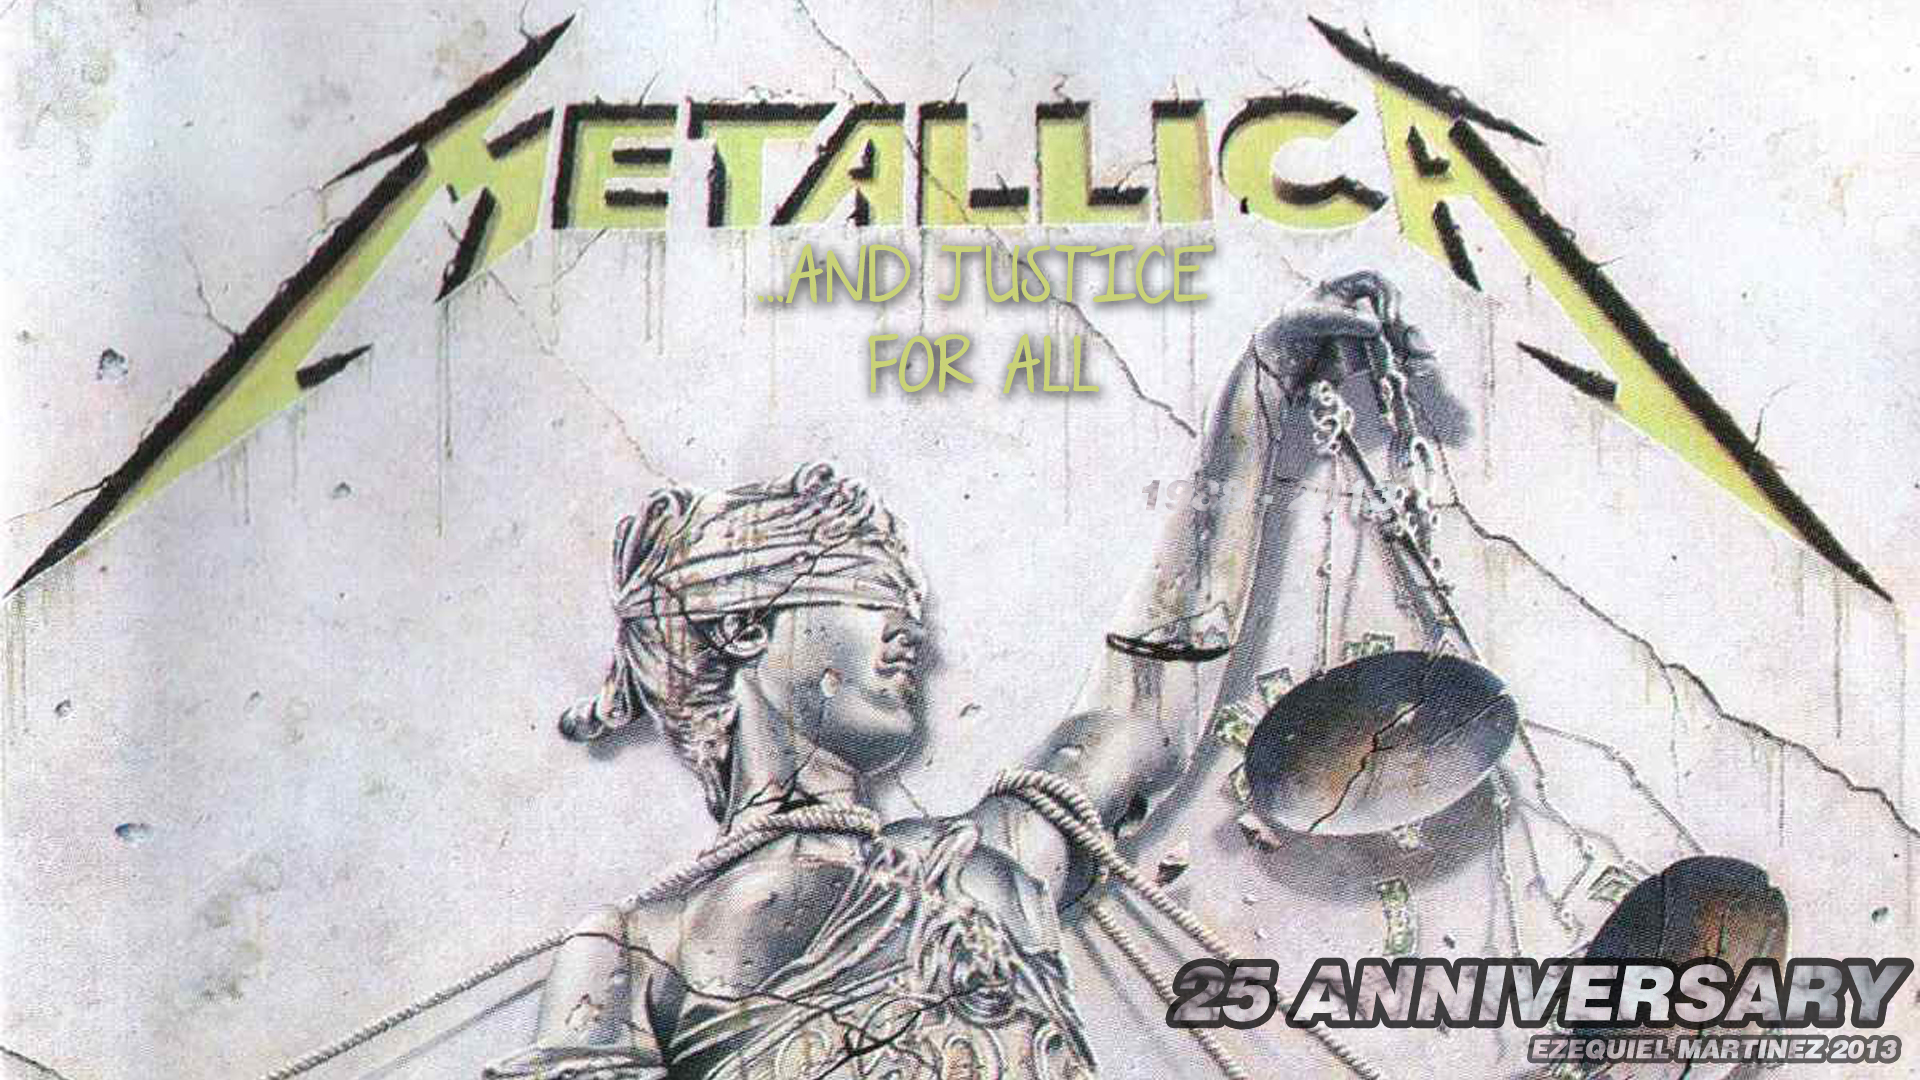 Metallica Wallpaper And Justice For All Fo